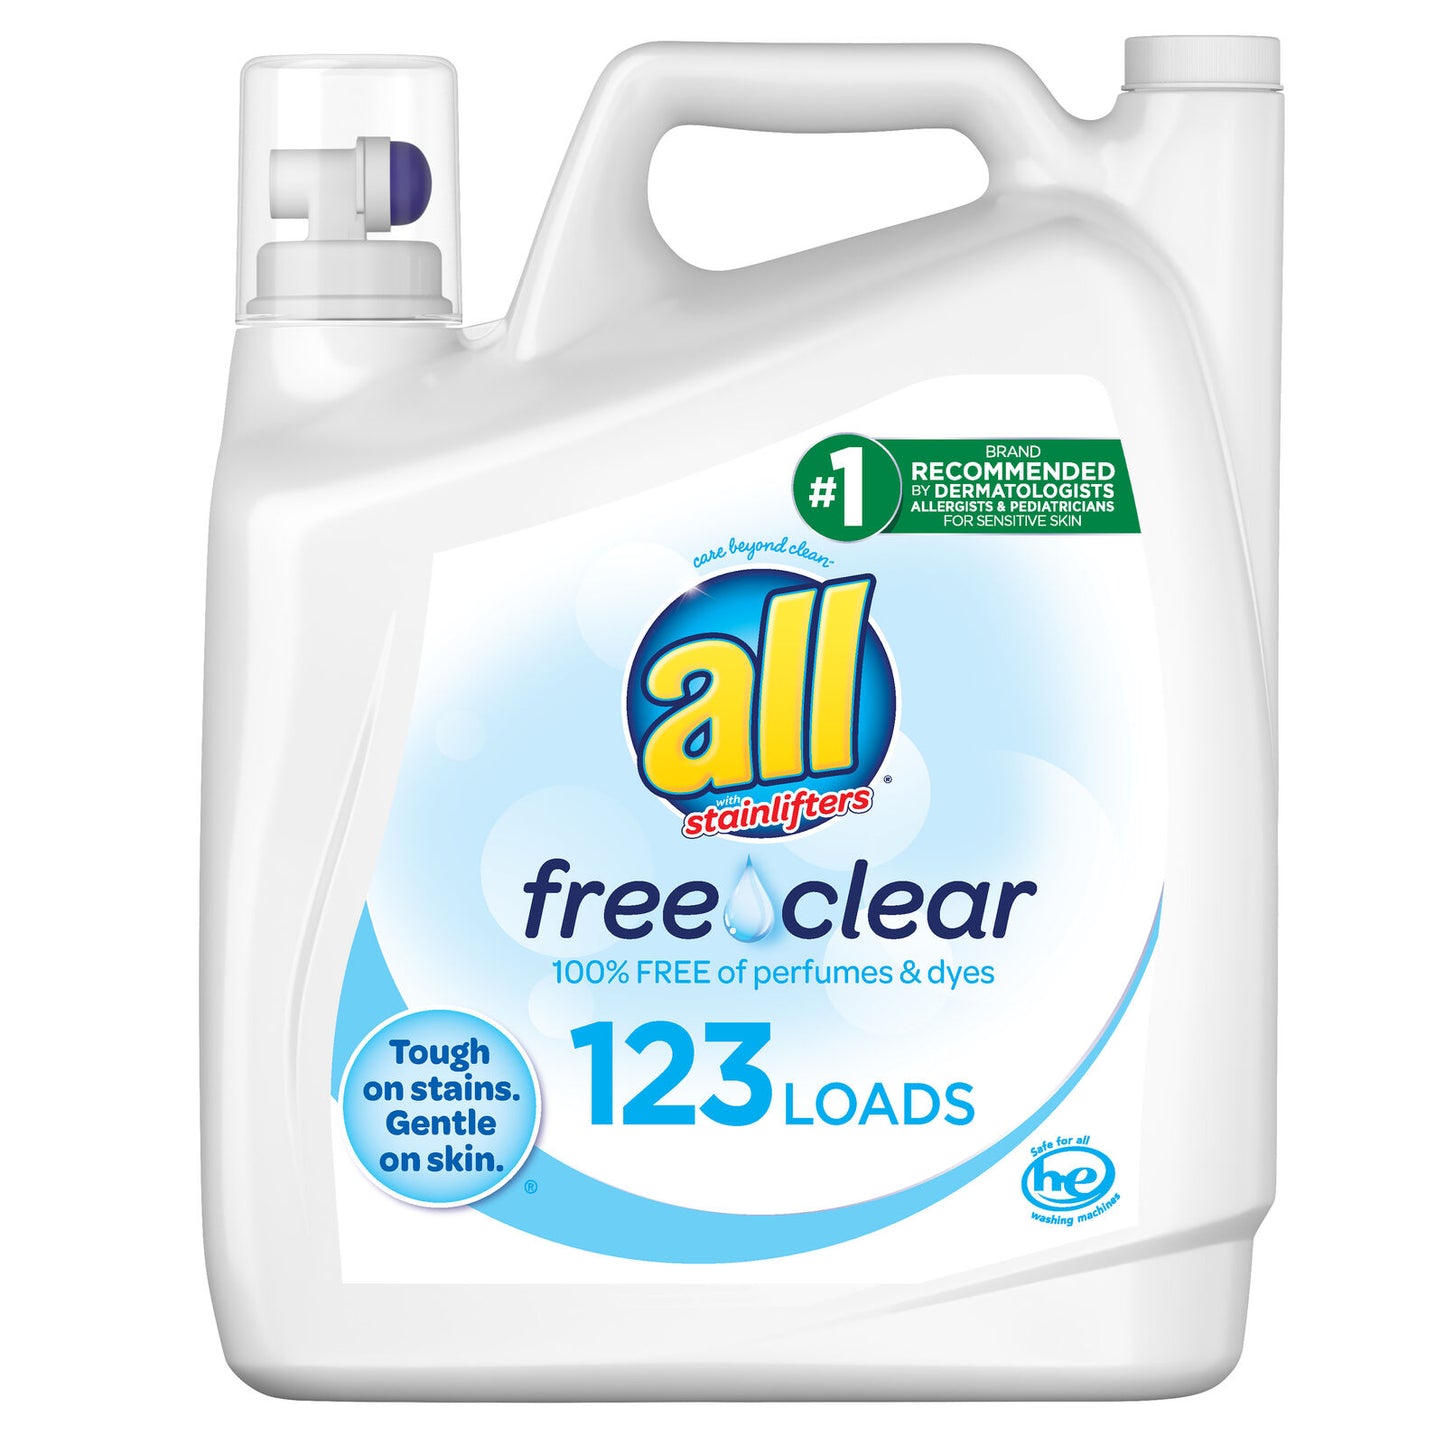 all Liquid Laundry Detergent, Free Clear for Sensitive Skin, 184.5 Oz 123 Lds ️